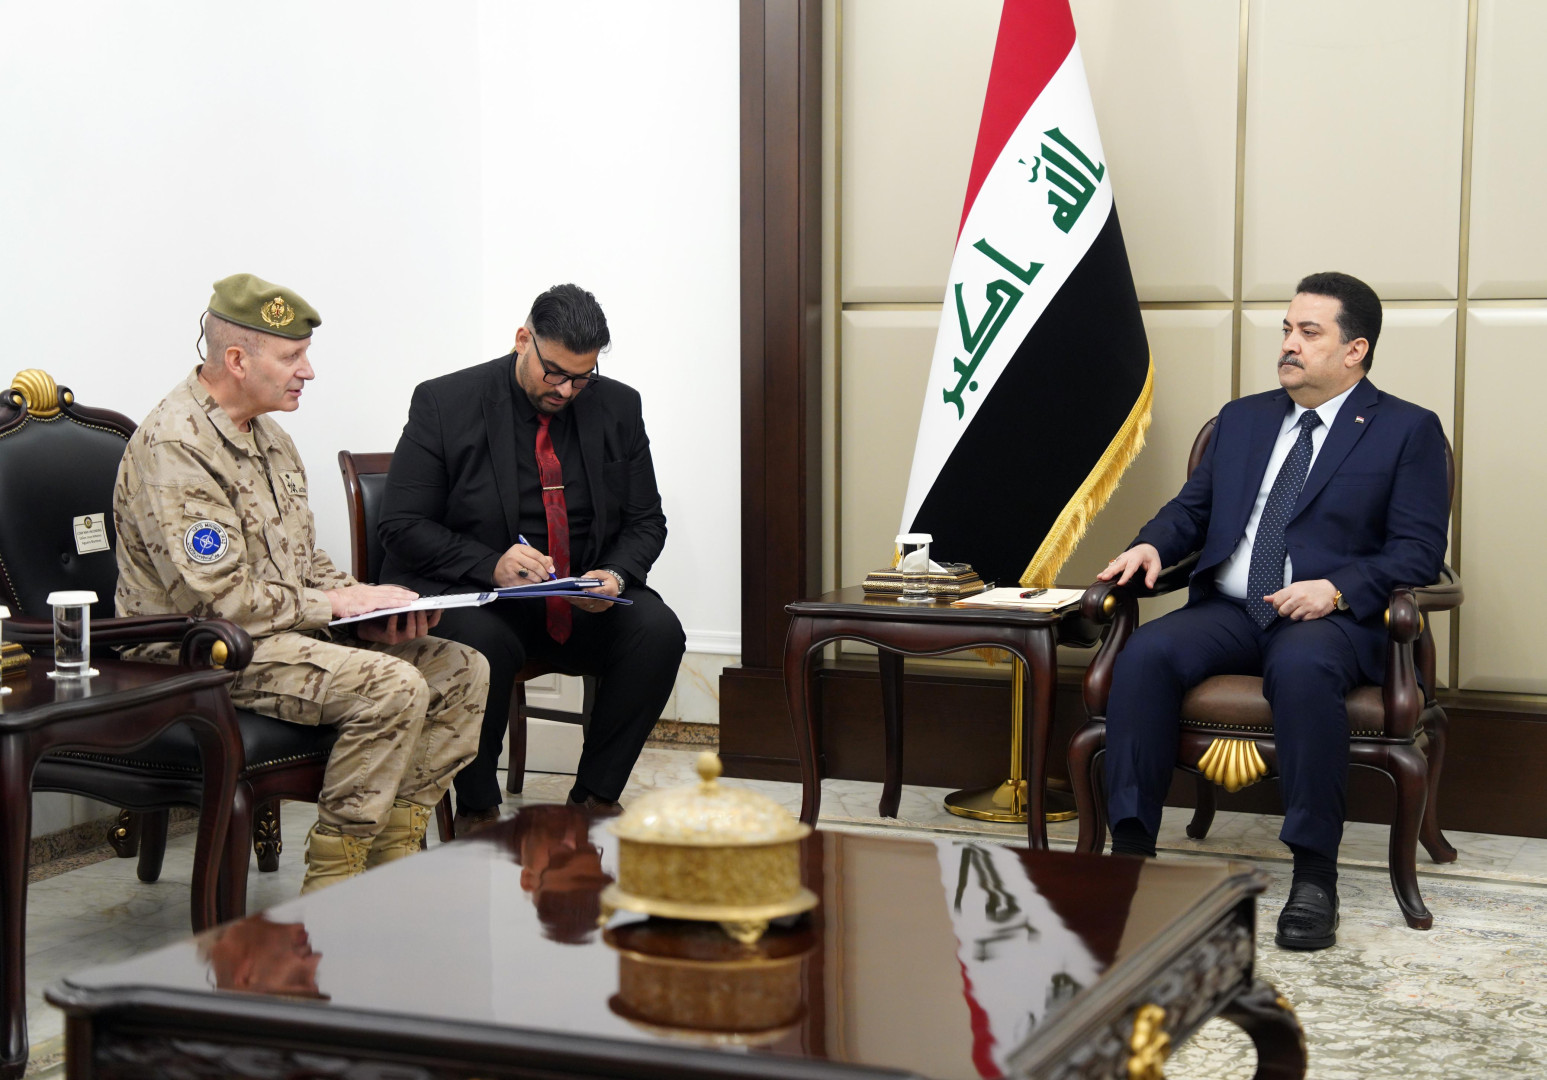 Iraqi PM discusses NATO's role, cybersecurity strategy with mission commander